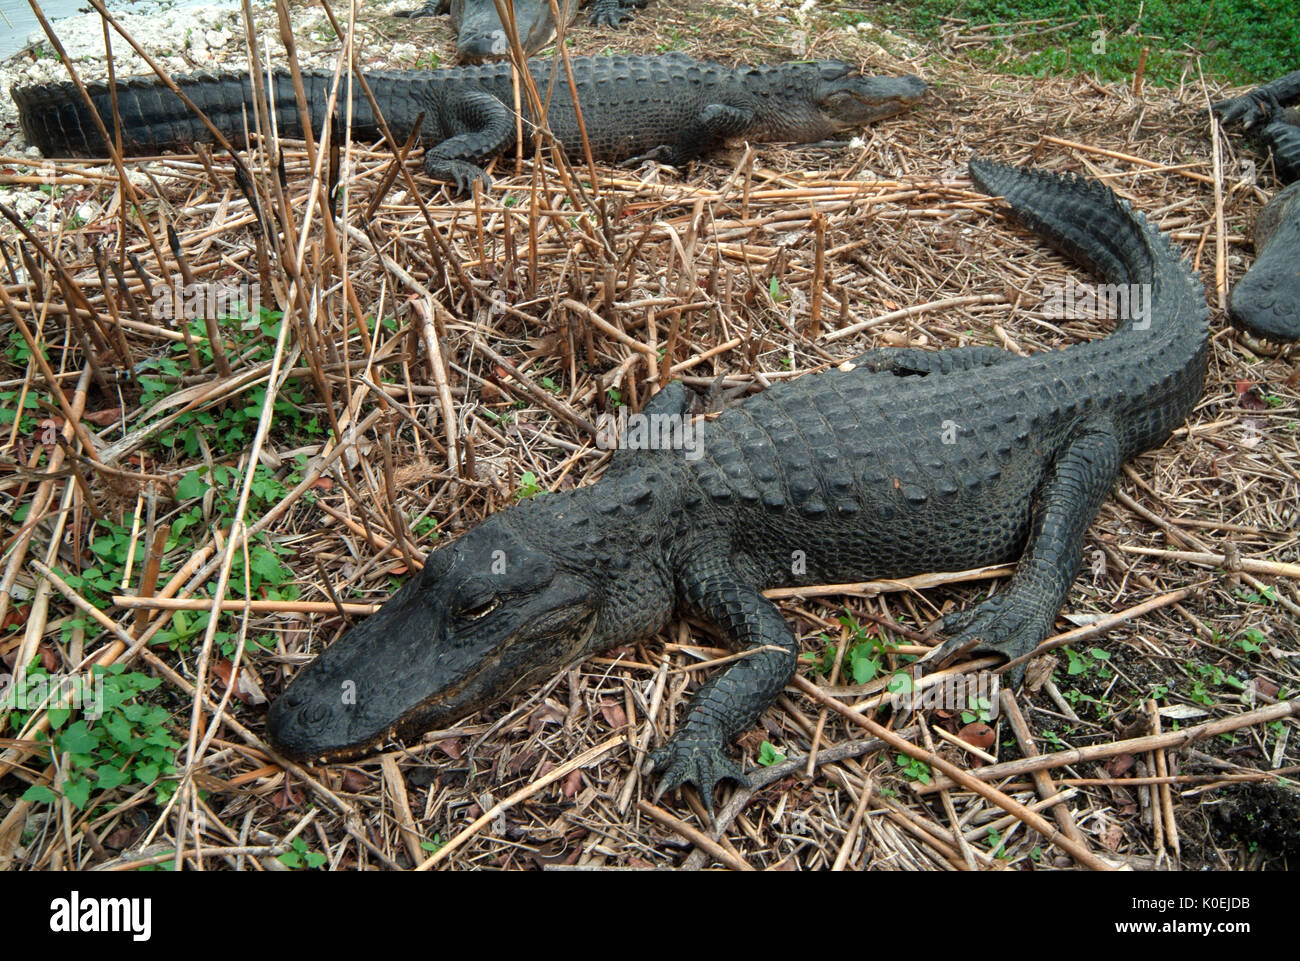 American Alligator, Alligator mississippiensis,adults resting on edge of bank, long tail, Everglades National Park, predator Stock Photo